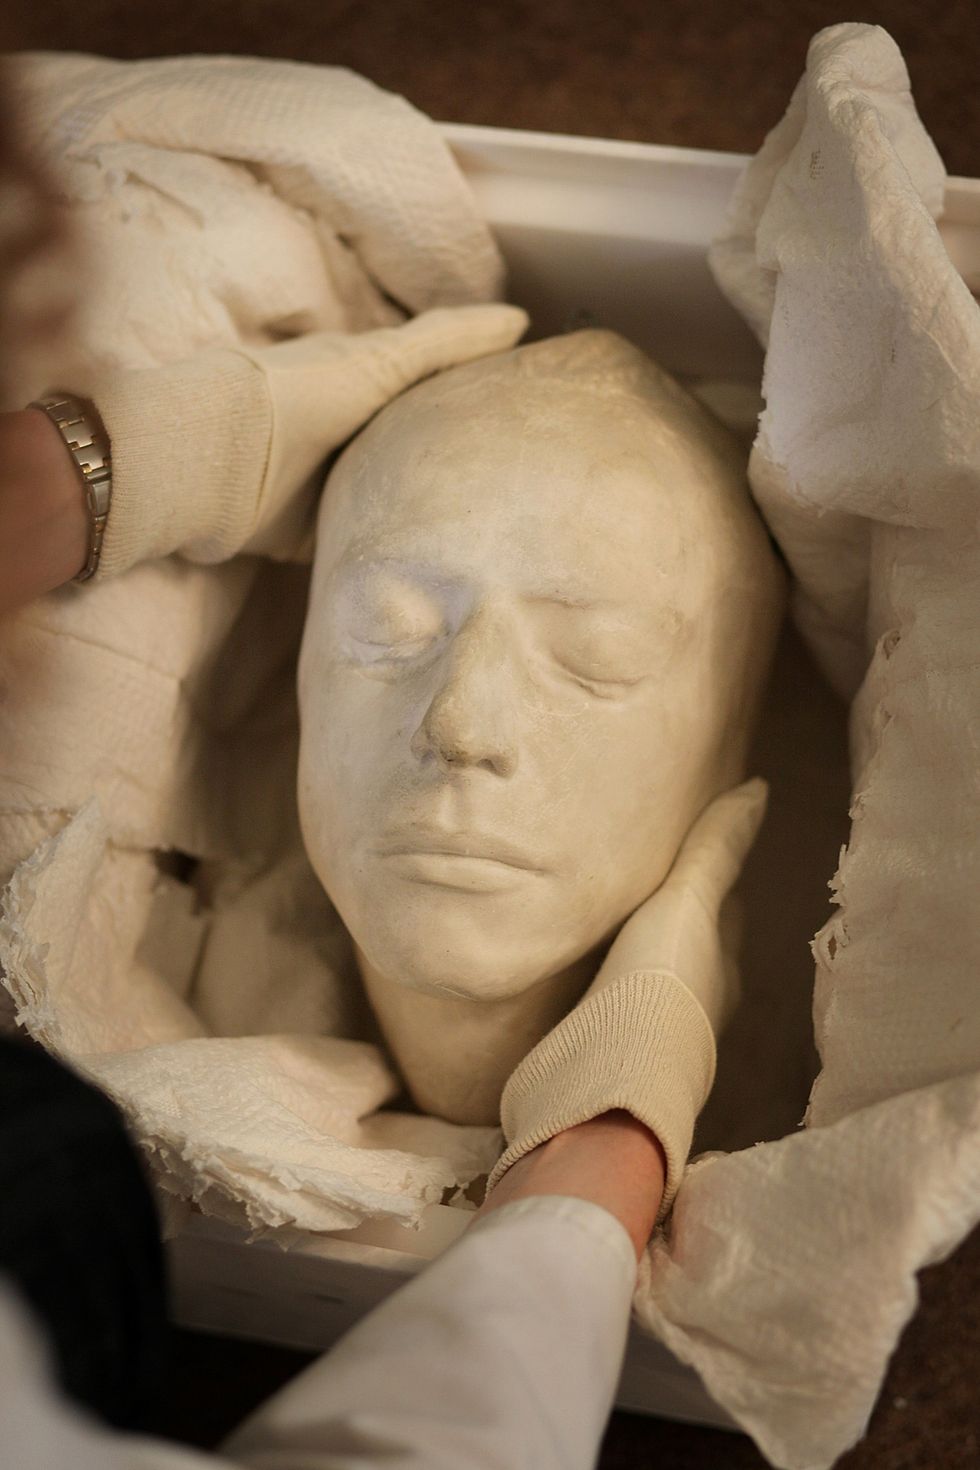 English poet John Keats' death mask is prepared for display at his house on July 22, 2009 in London, England. Keats' House, the former home of renowned English poet John Keats, is to reopen to the public after recent refurbishment. The Grade I-listed house in Hampstead has been transformed thanks to a Heritage Lottery Fund grant of £420,000. Keats lived in the house from 1818 to 1820 and it was here that he wrote 'Ode to a Nightingale' and fell in love with Fanny Brawne, the girl next door. It was from this house that he travelled to Rome, where he died of tuberculosis aged just 25. (Photo by Peter Macdiarmid/Getty Images)